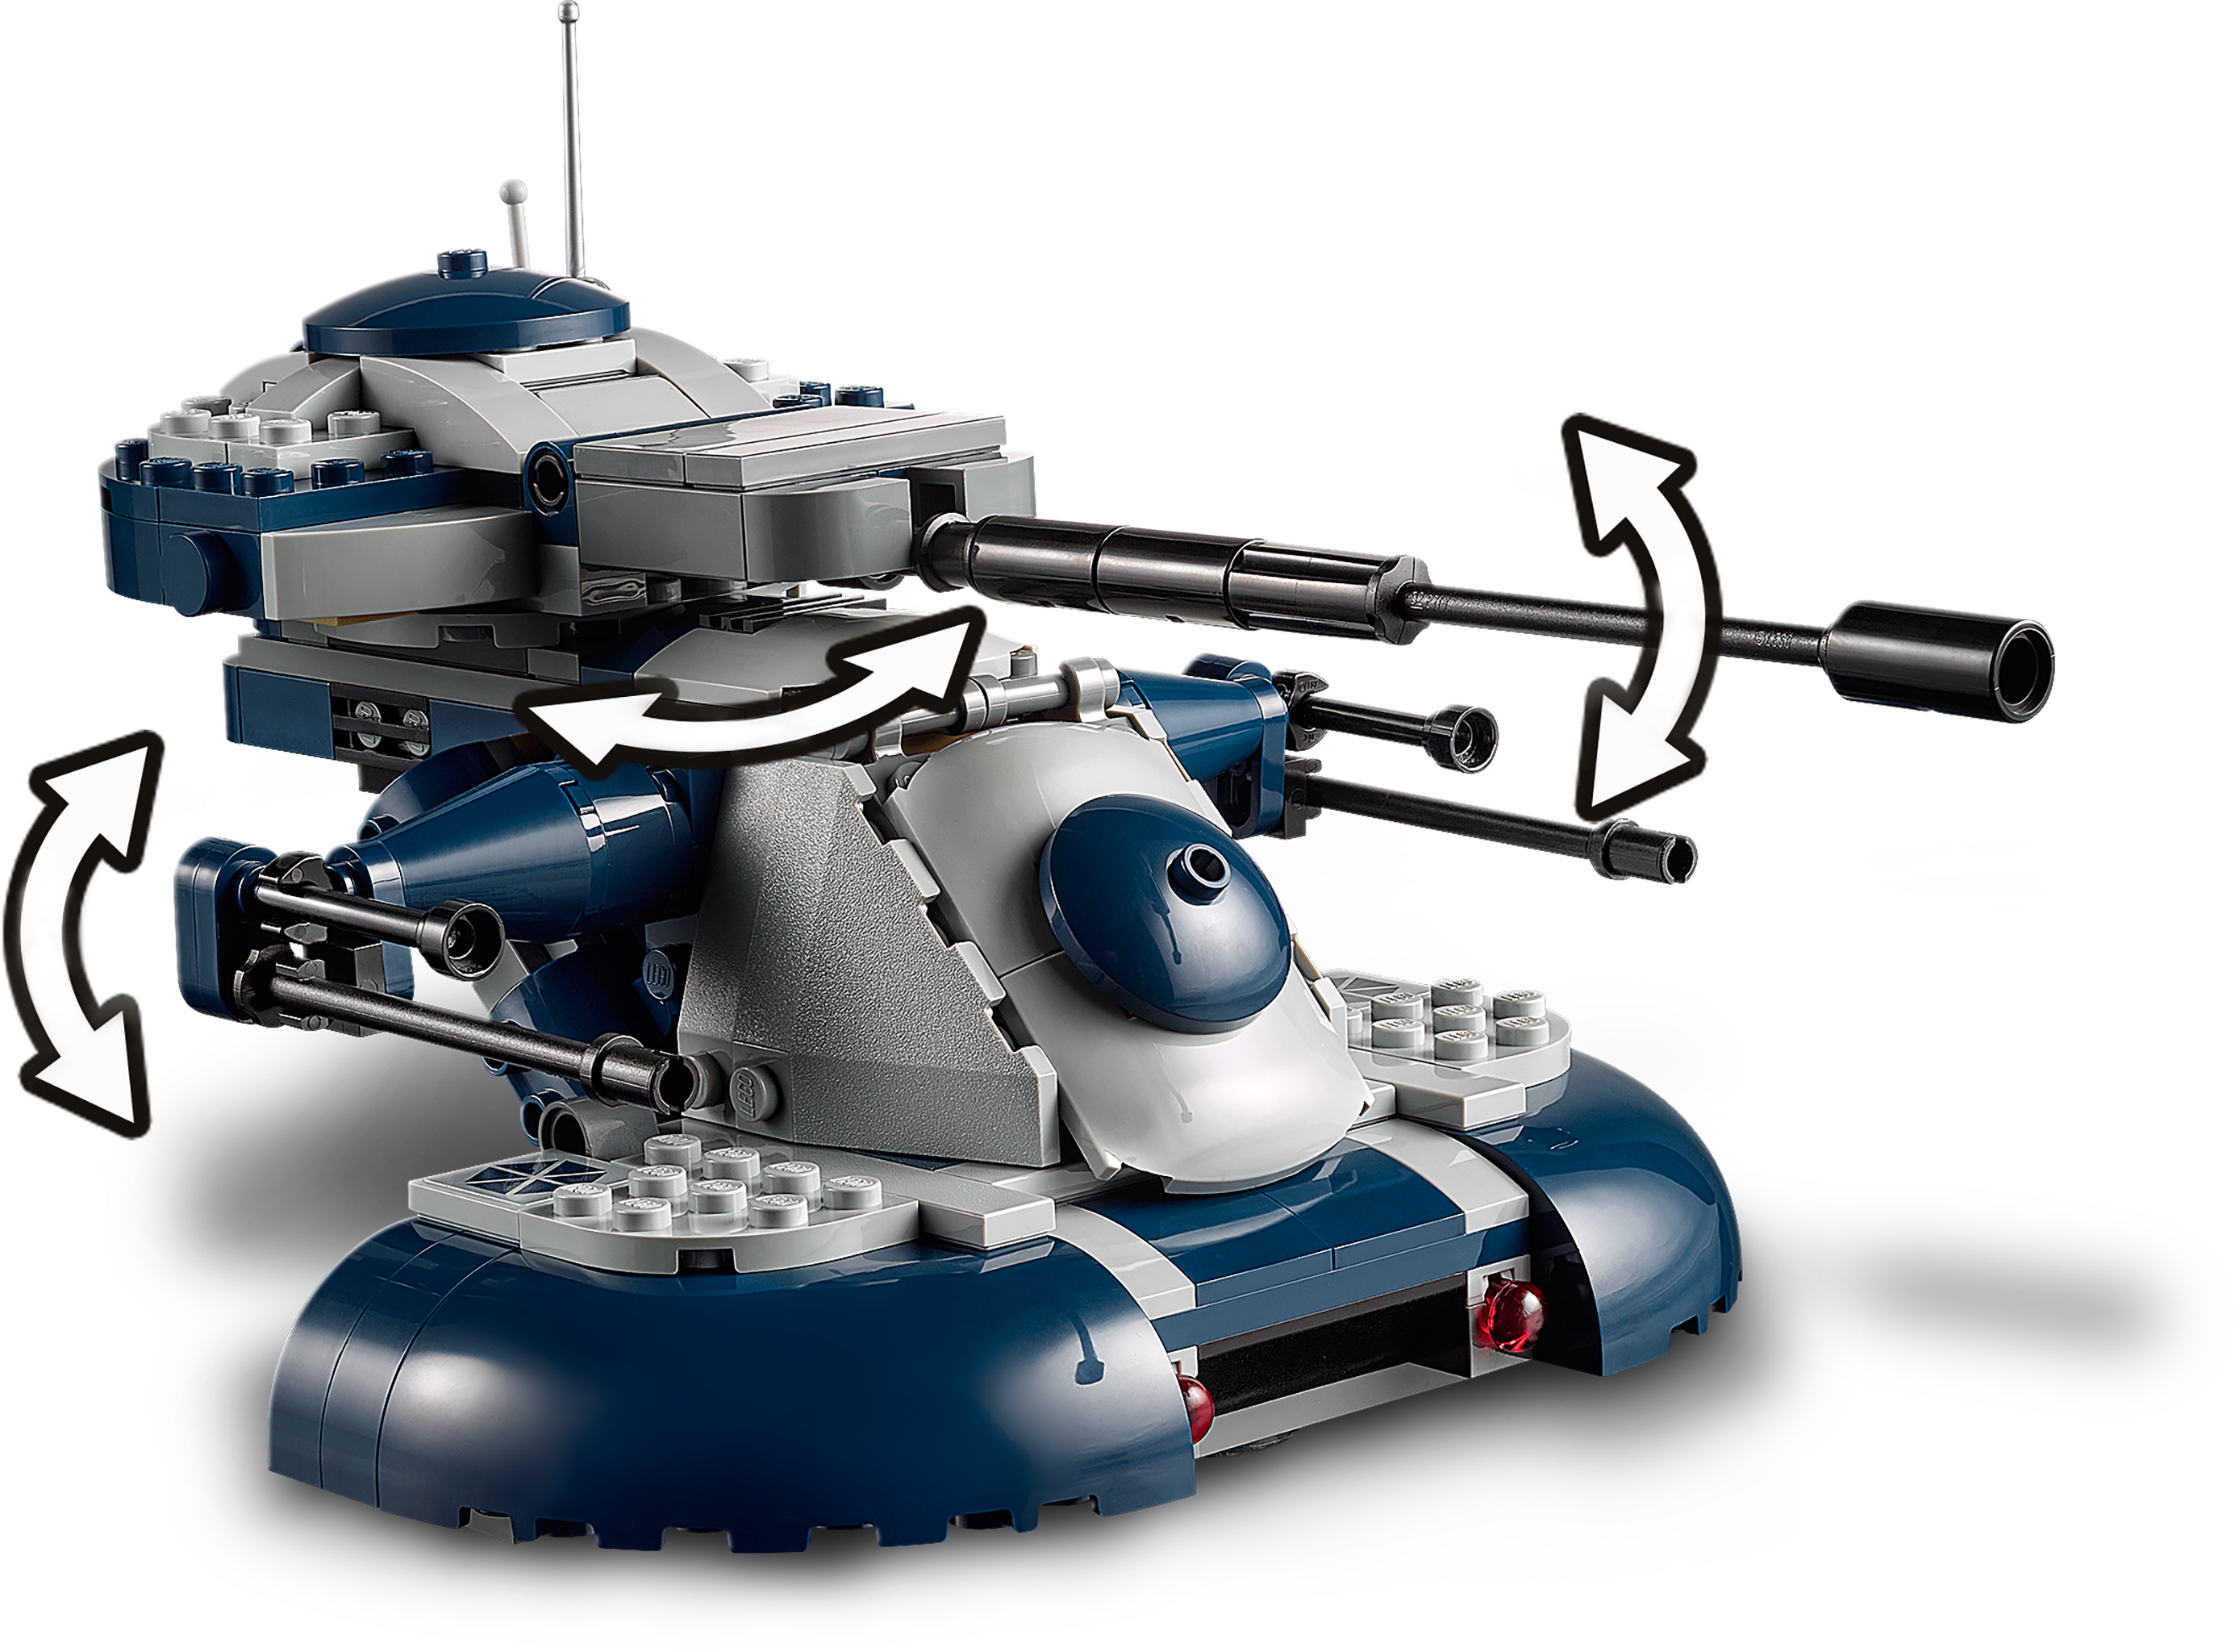 Armored Tank | Wars™ | Buy online at the Official LEGO® Shop US